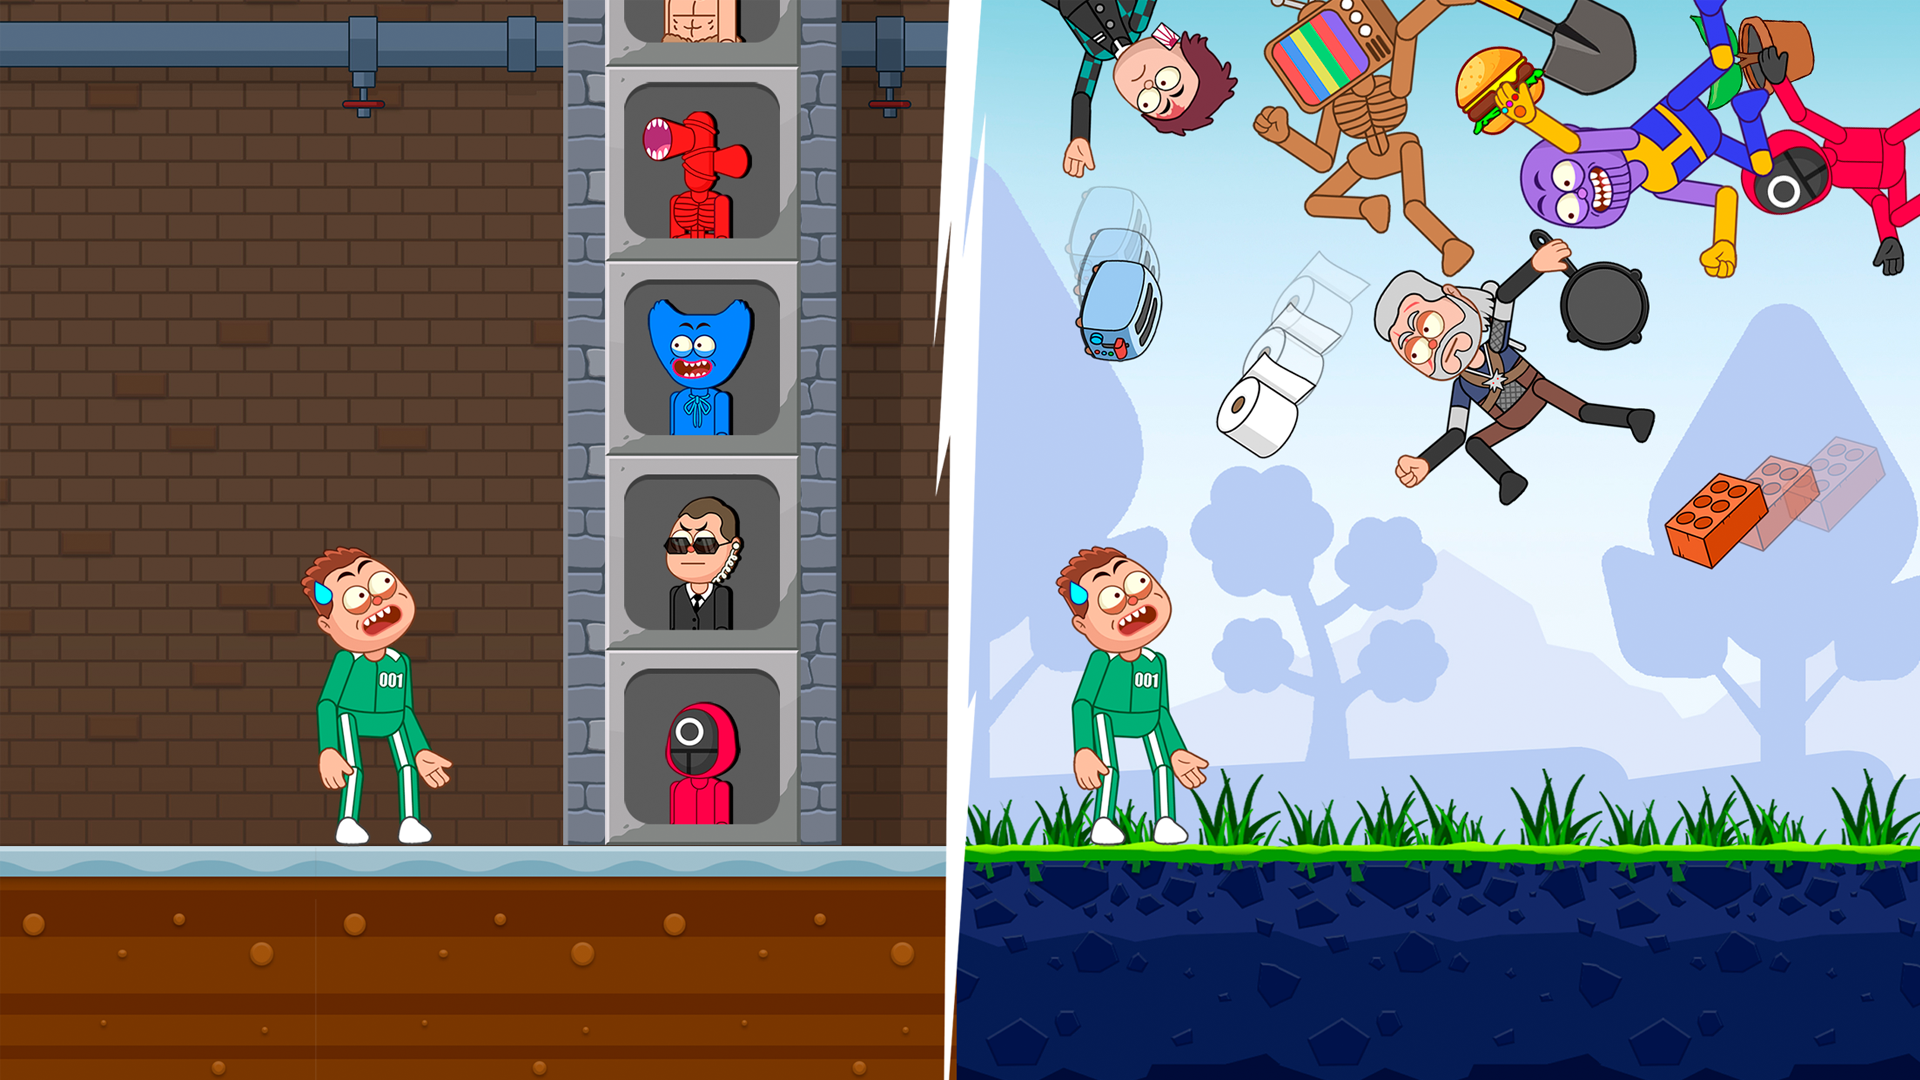 Baldi's Basics Squid Game Mod APK for Android Download